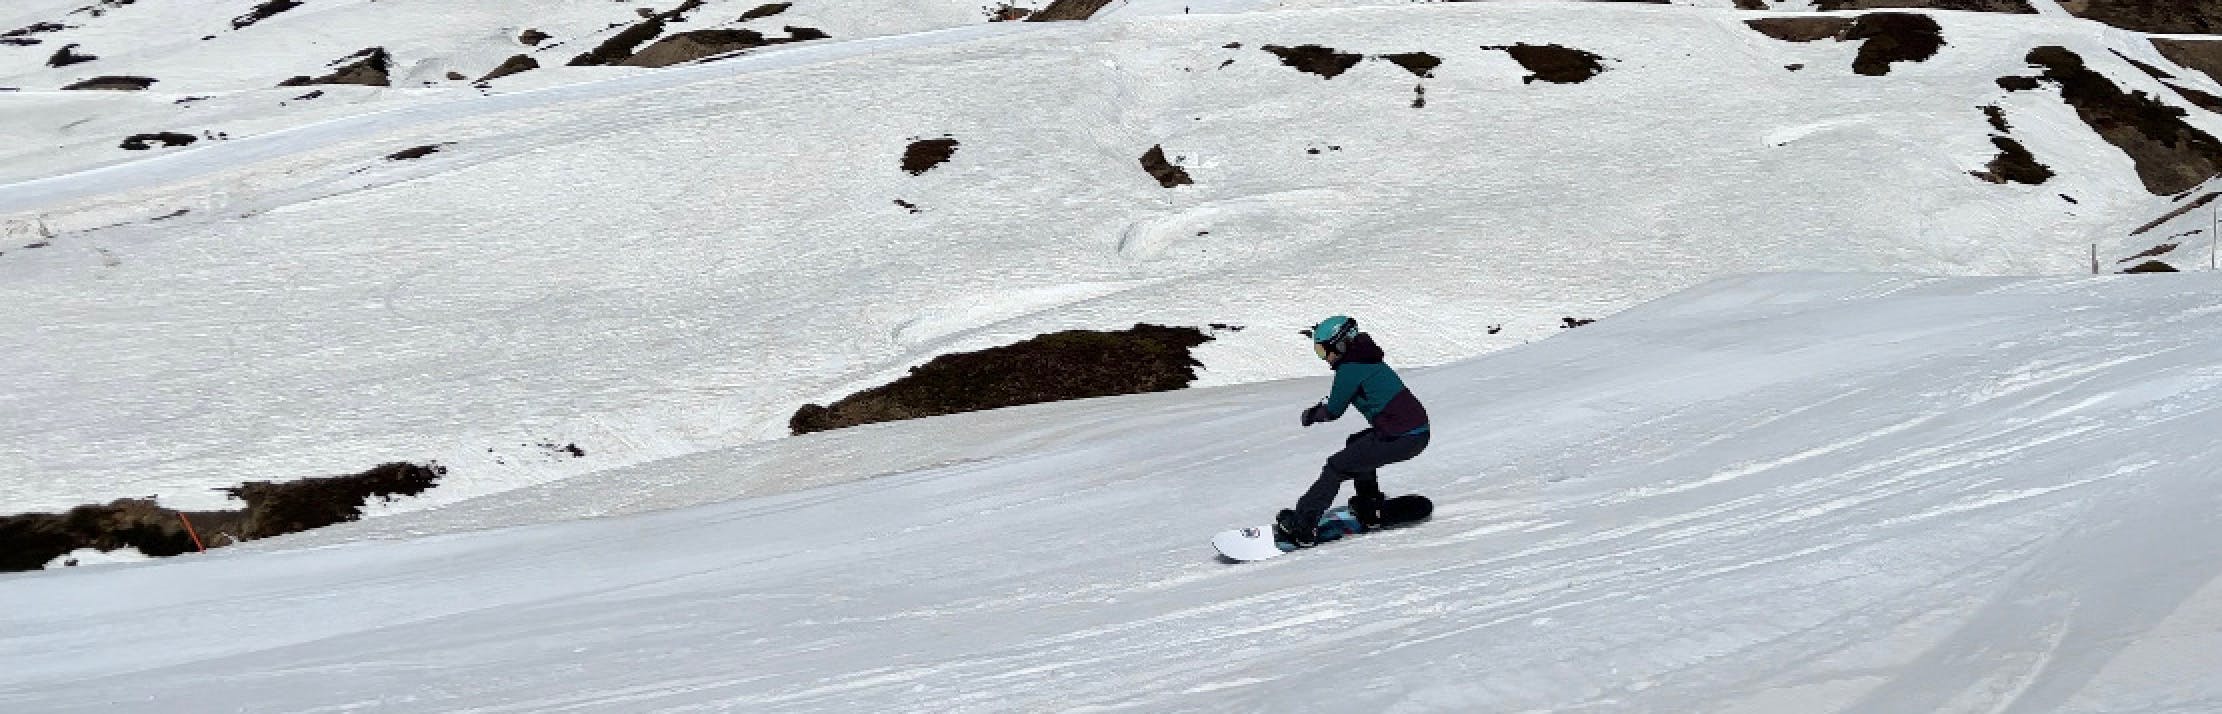 A snowboarder turns down a snowy trail. She is wearing a blue jacket and a blue helmet.